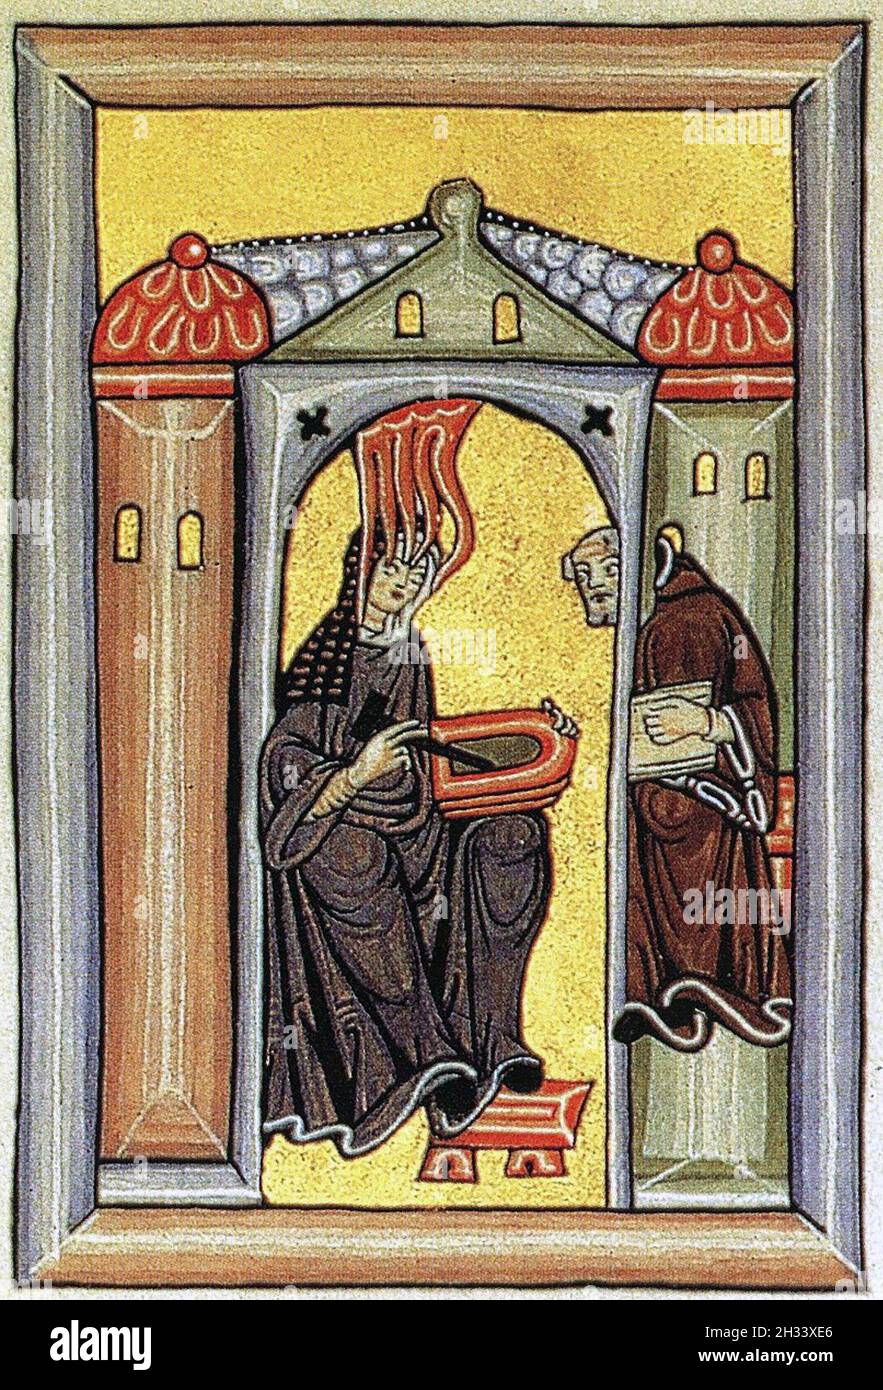 HILDEGARD OF BINGEN (c 1098-1179) German Benedictine abbess, composer, doctor. Illustration from her Scivias of 1151 describing her visions. Here showing her receiving a vision and dictating them to t her teacher Volmar Stock Photo